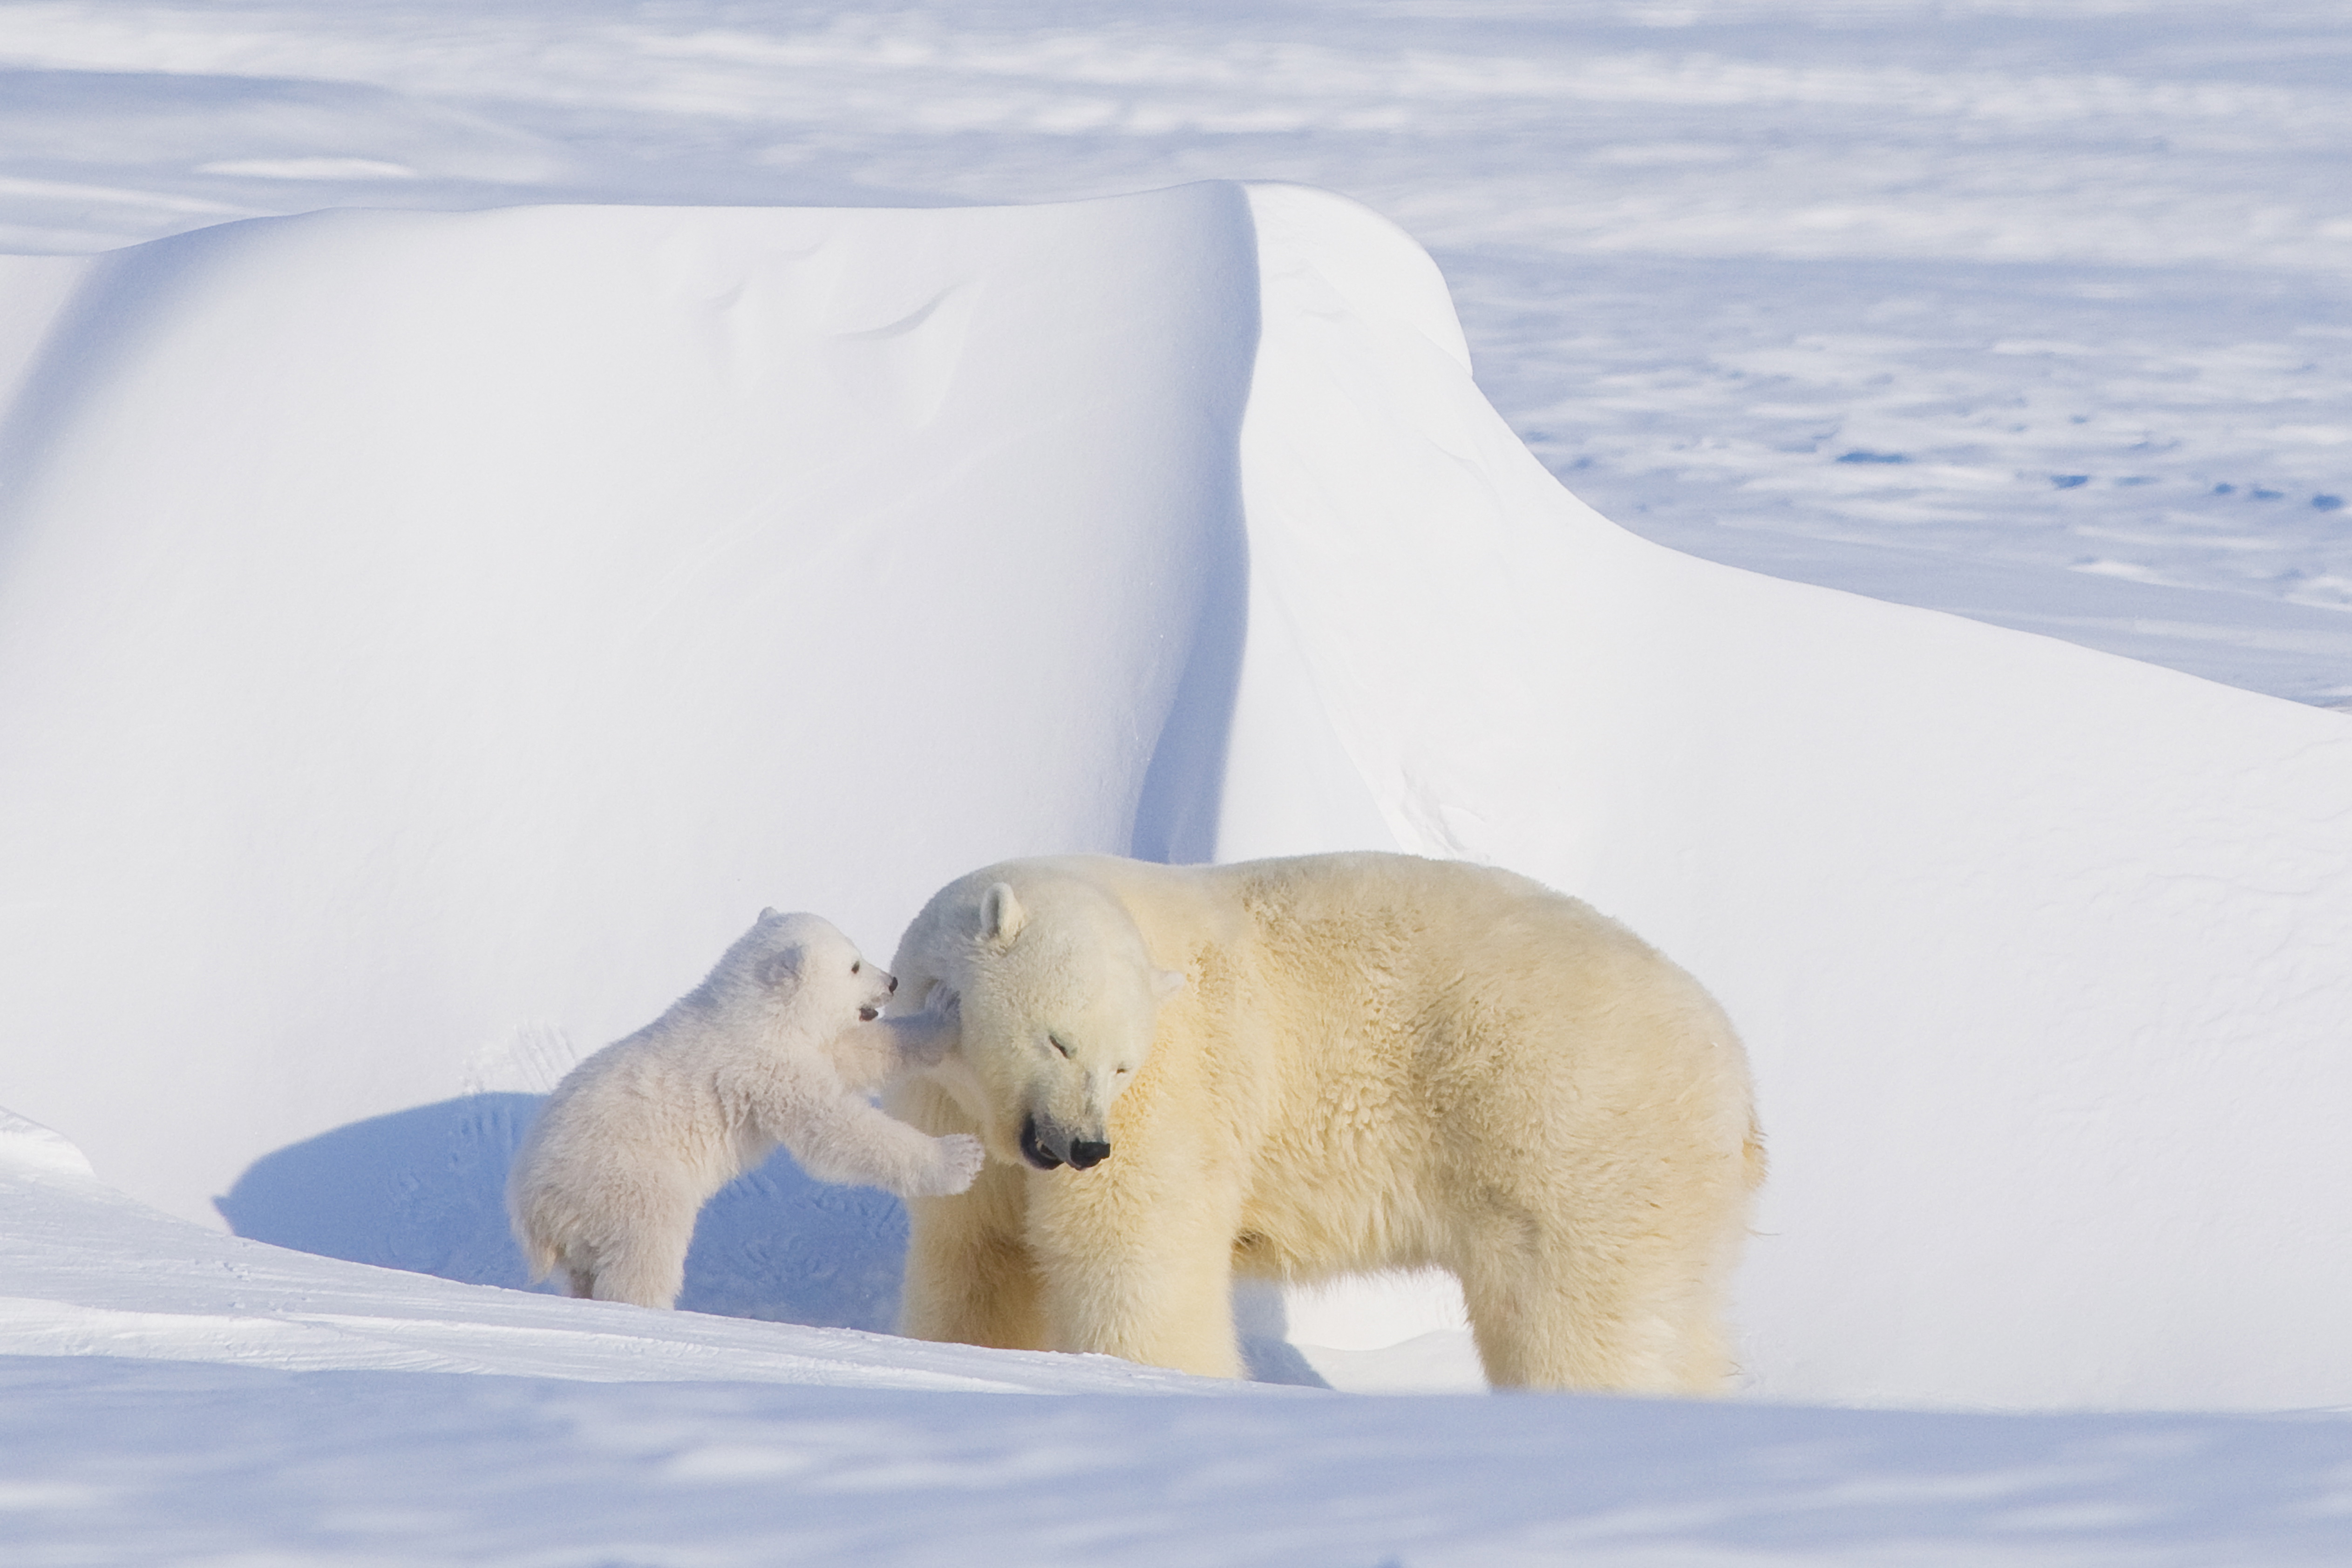 Shell did not mention polar bears in its announcement Monday that it was st...